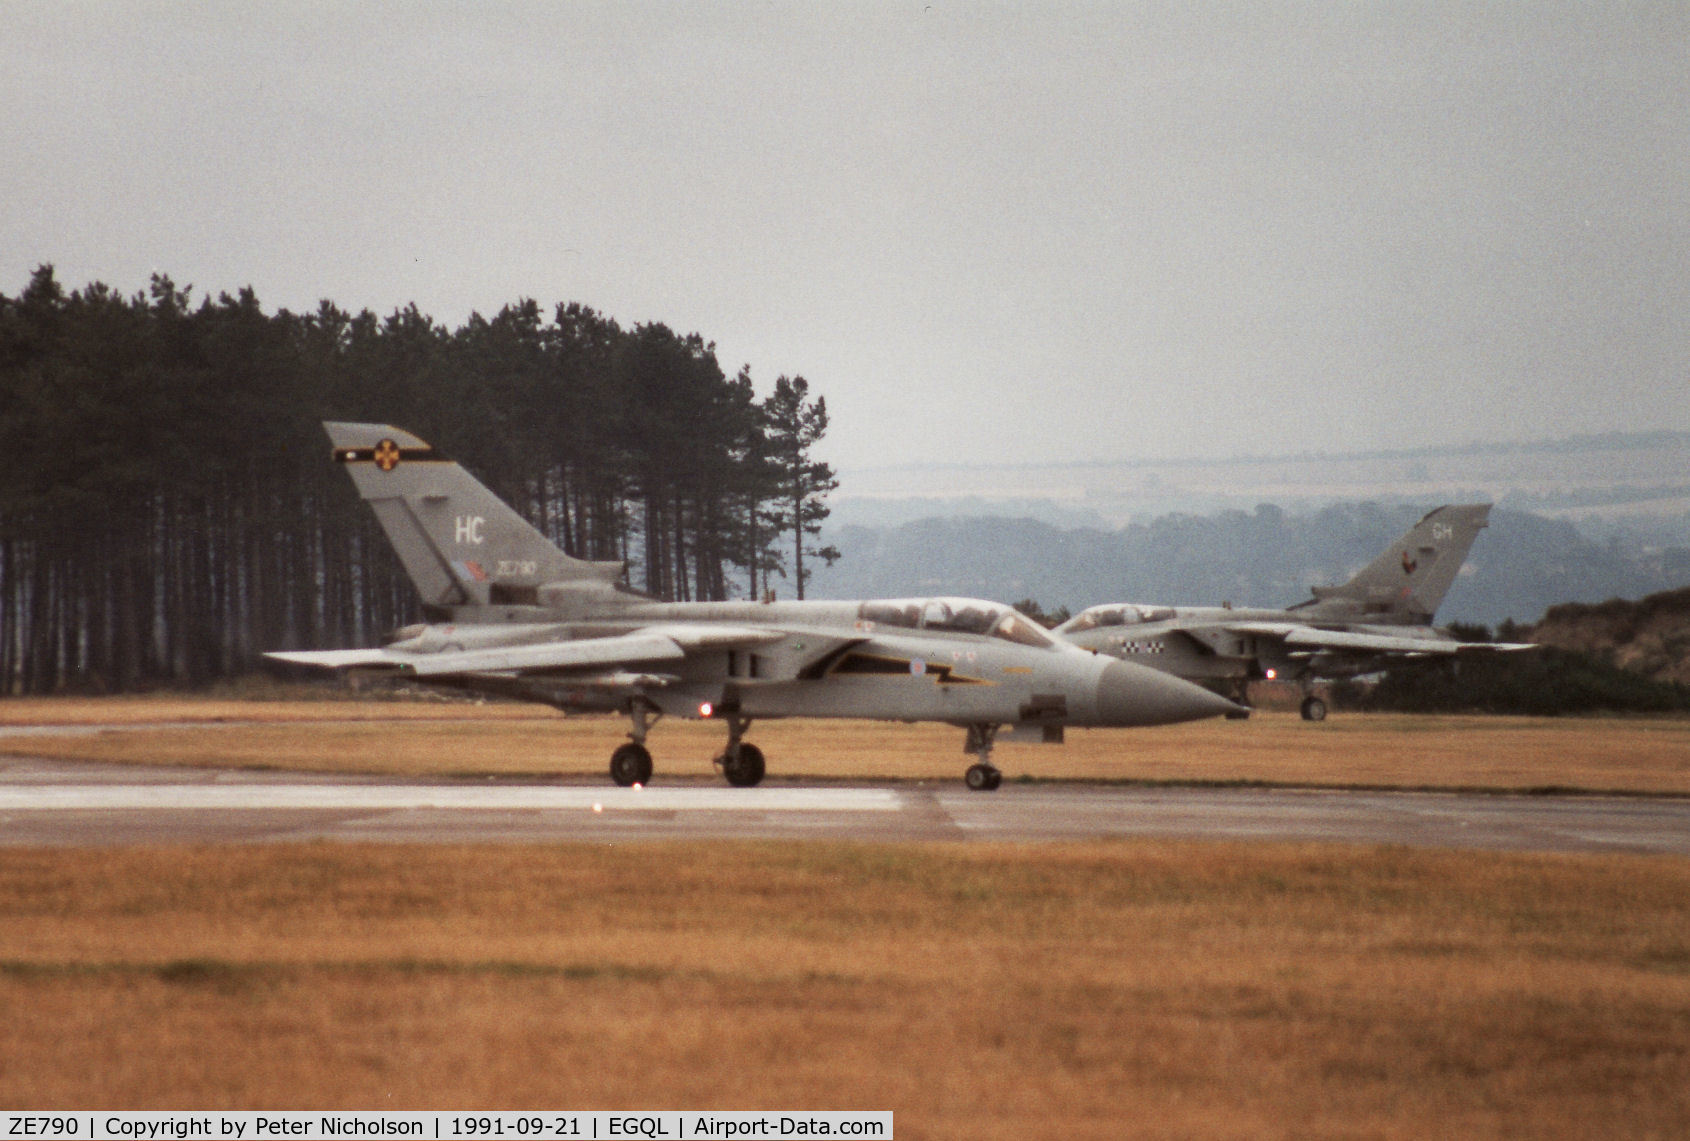 ZE790, 1988 Panavia Tornado F.3 C/N AS066/700/3317, Tornado F.3 of 111 Squadron lining up for take-off at the 1991 RAF Leuchars Airshow.